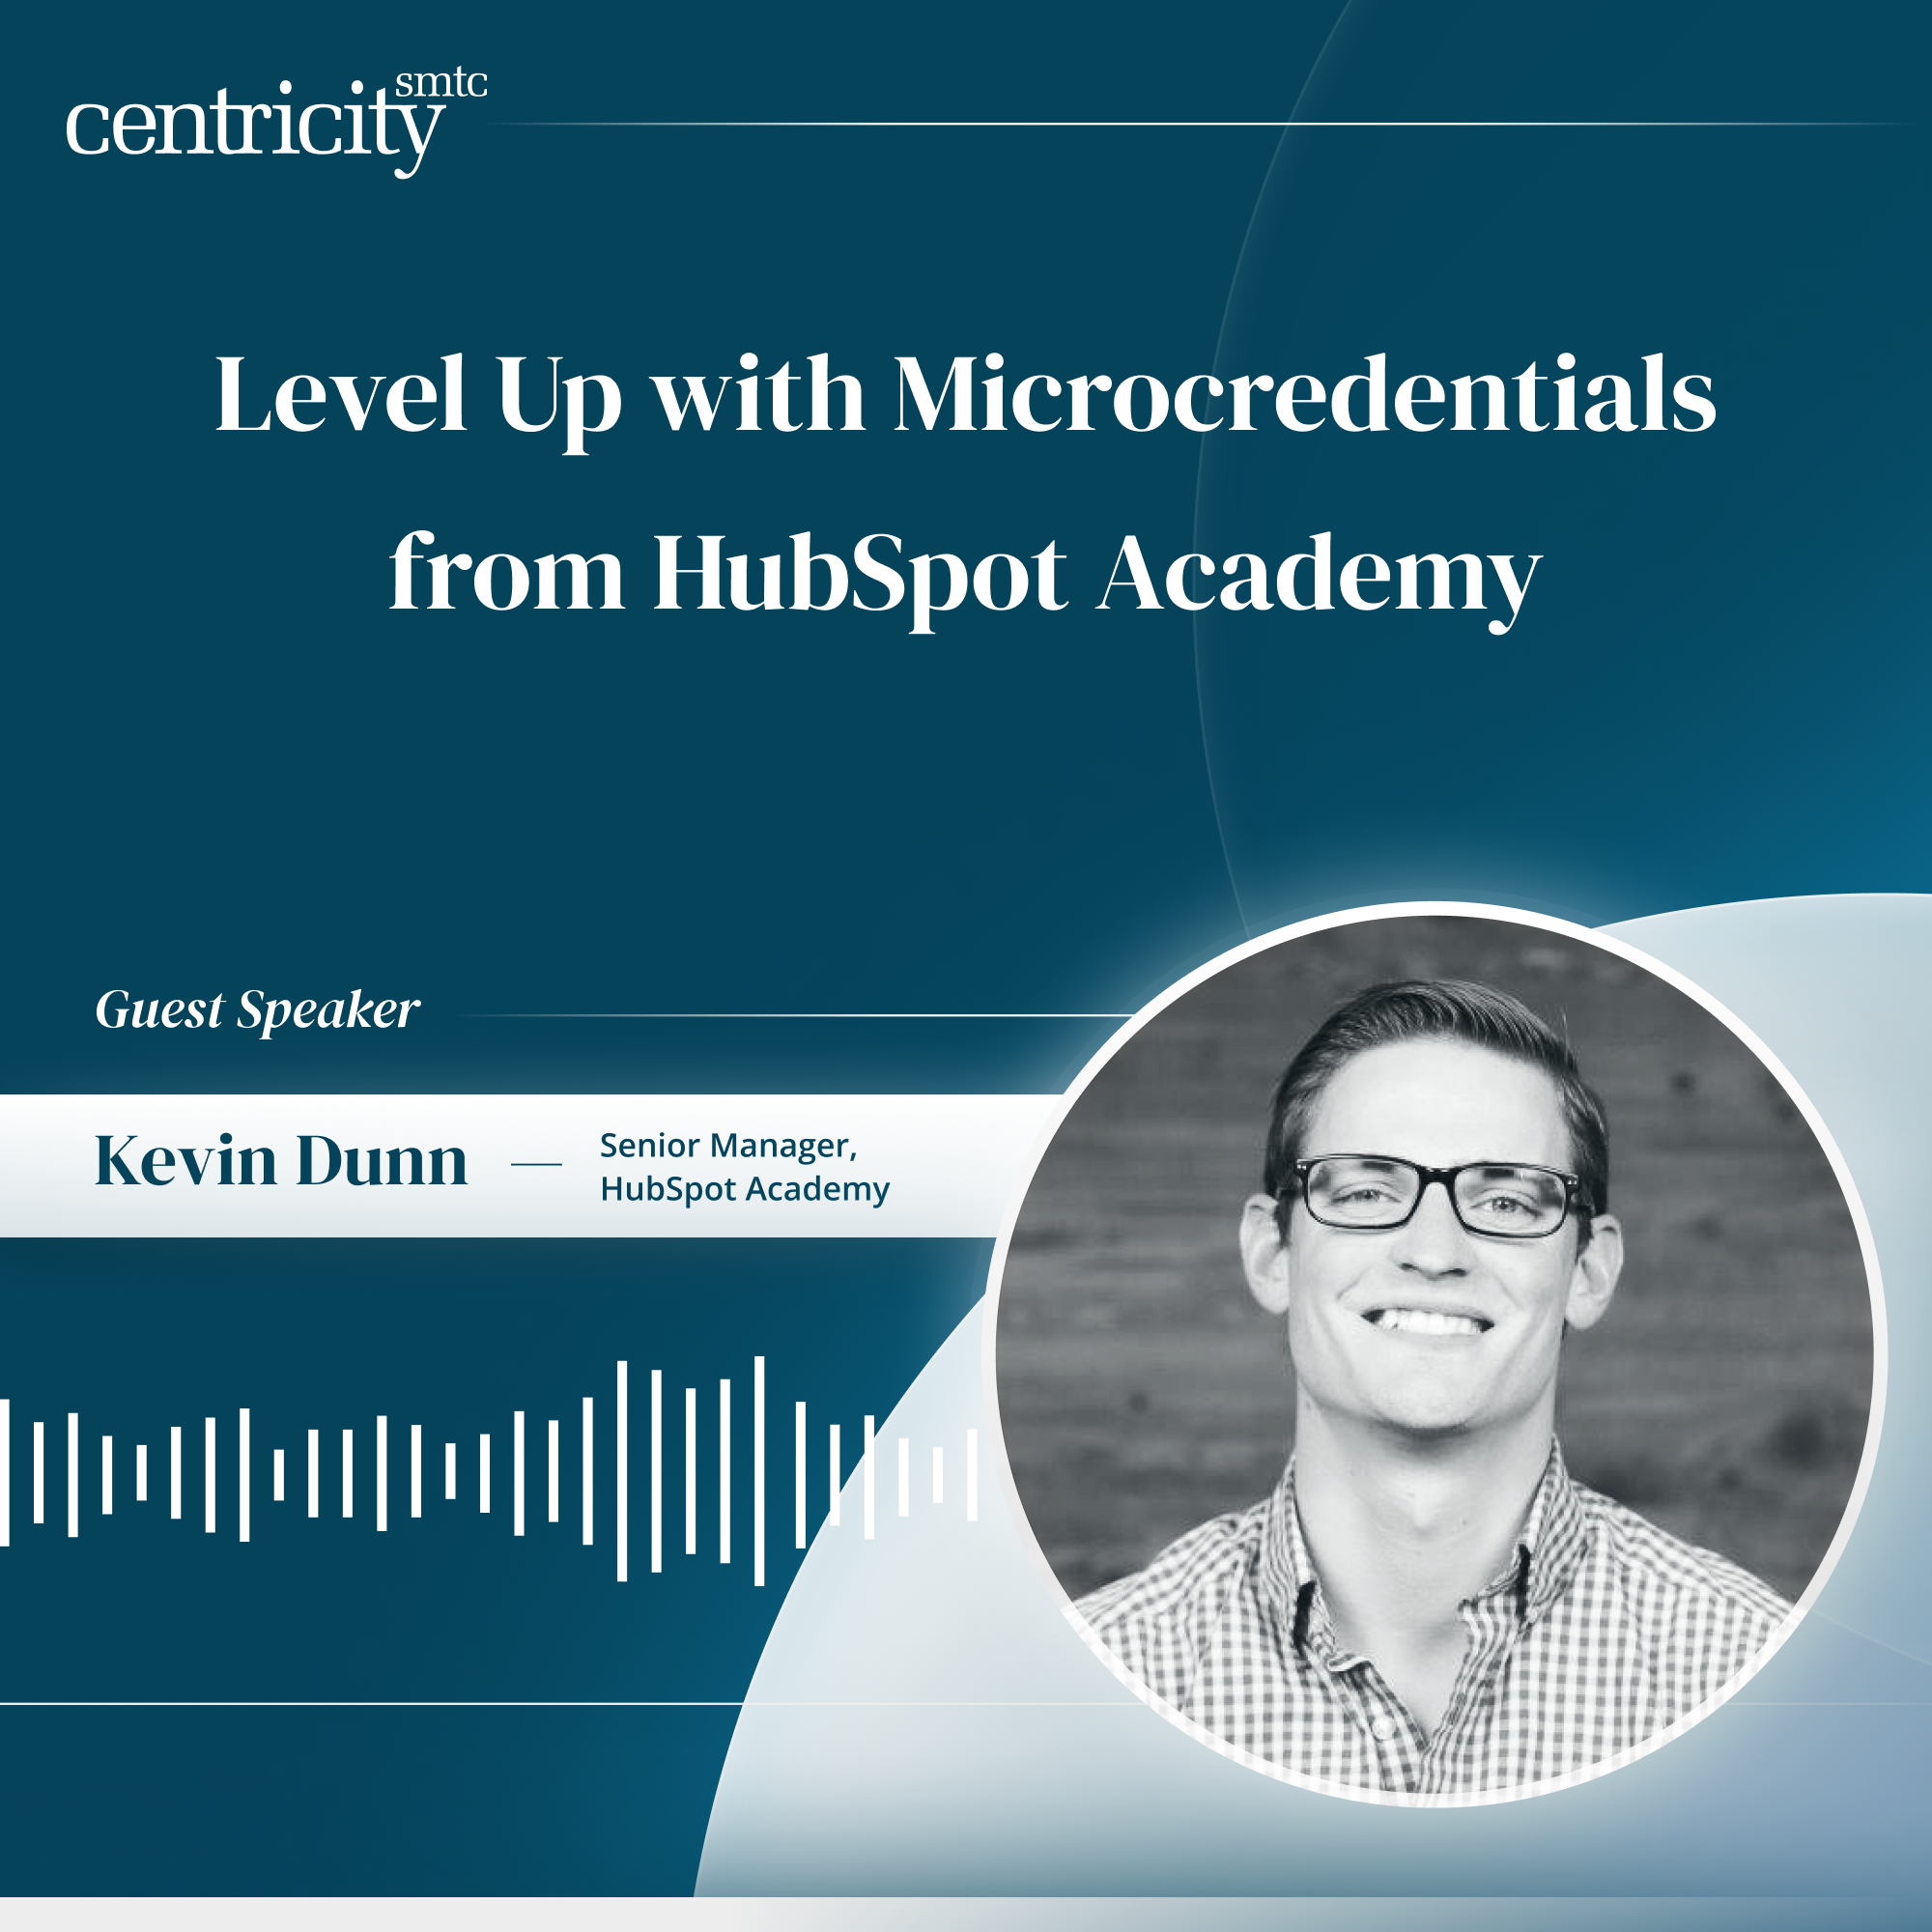 Level up with Microcredentials from HubSpot Academy